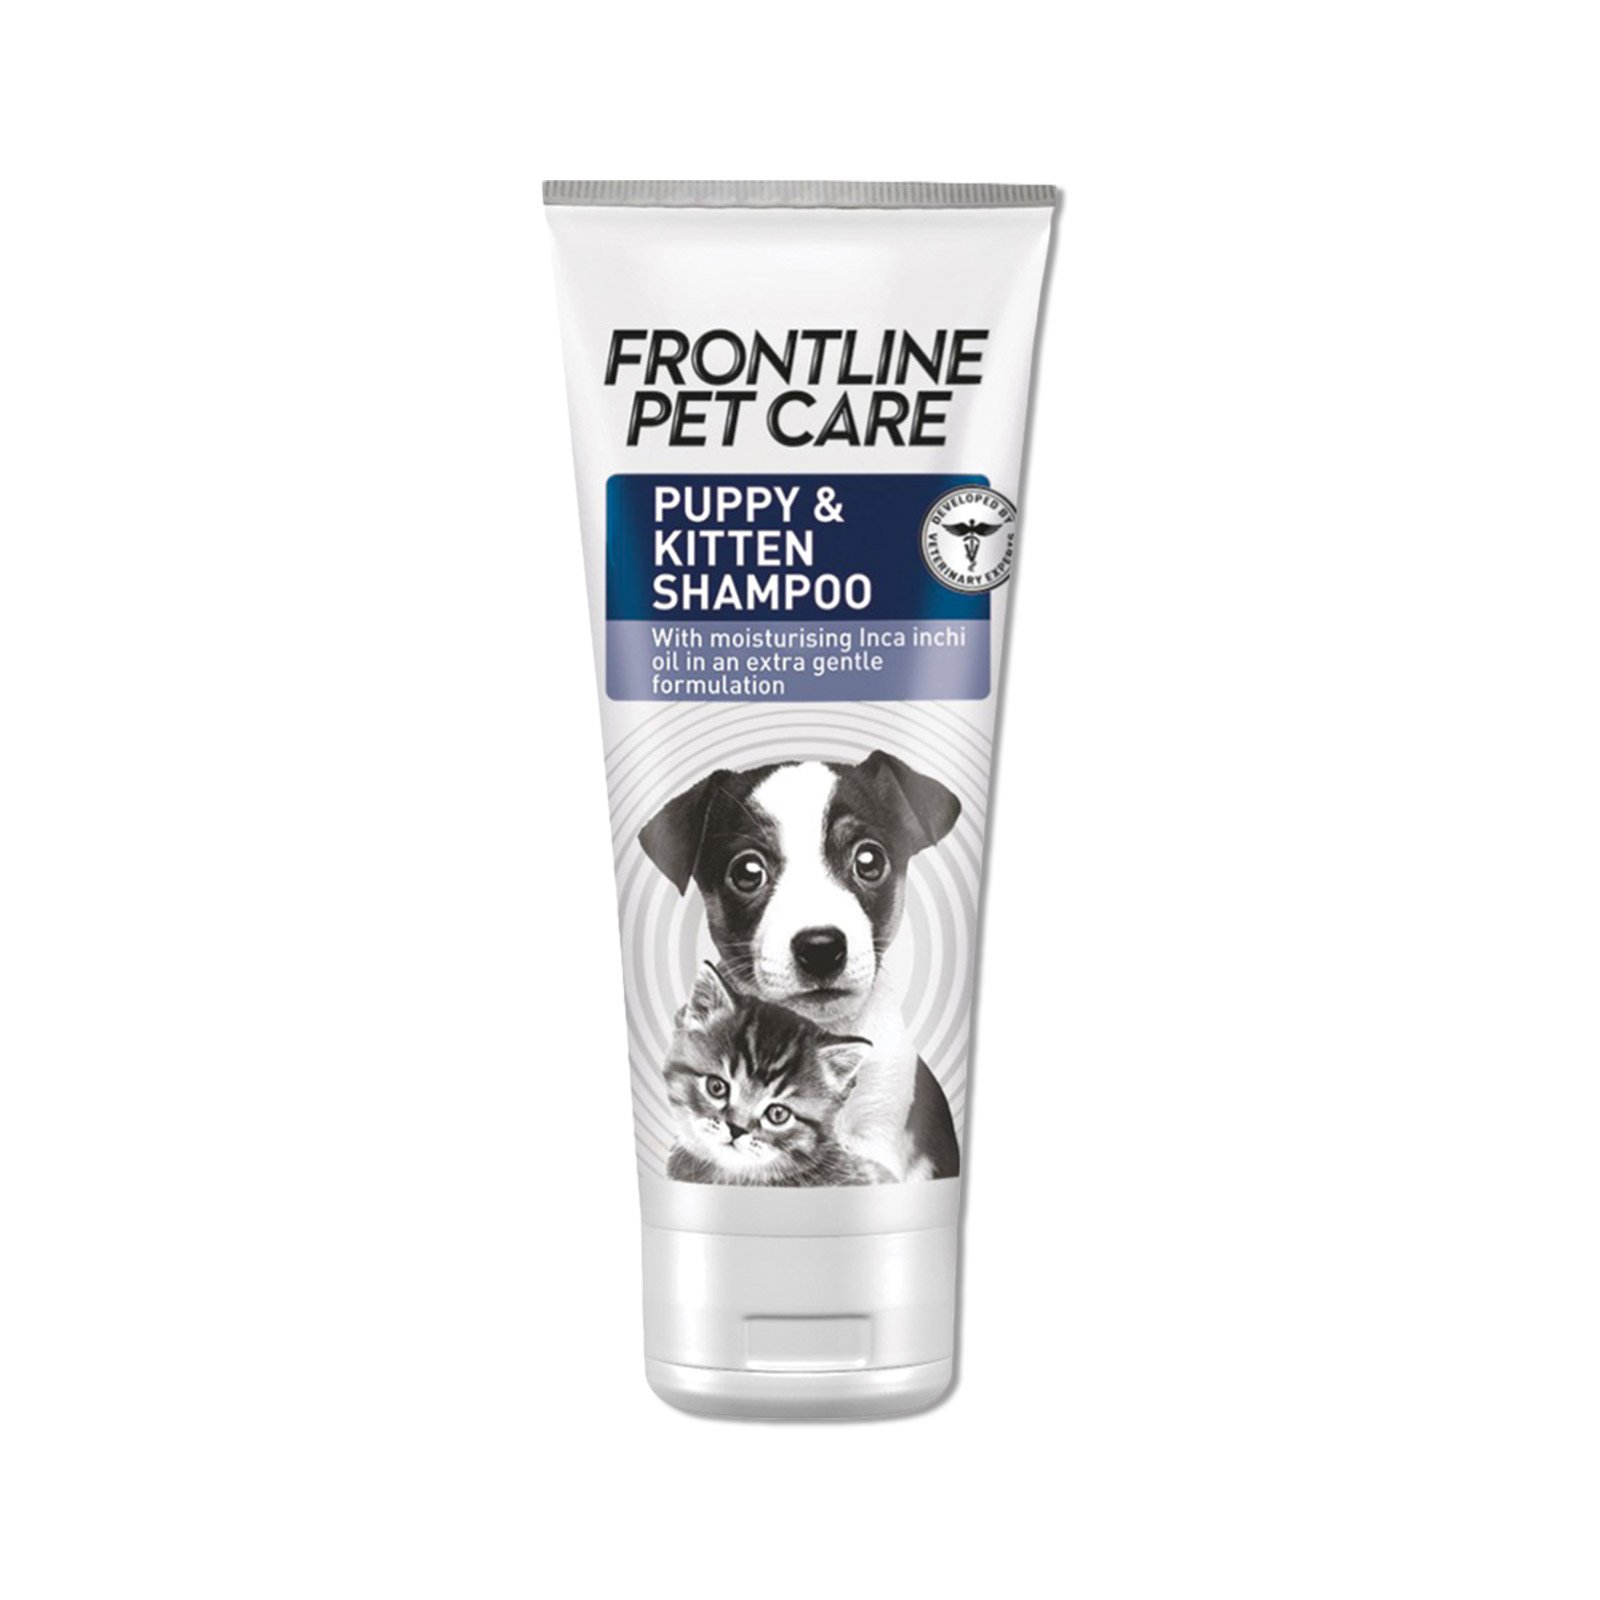 Frontline Pet Care Puppy/Kitten Shampoo for Dogs & Cats